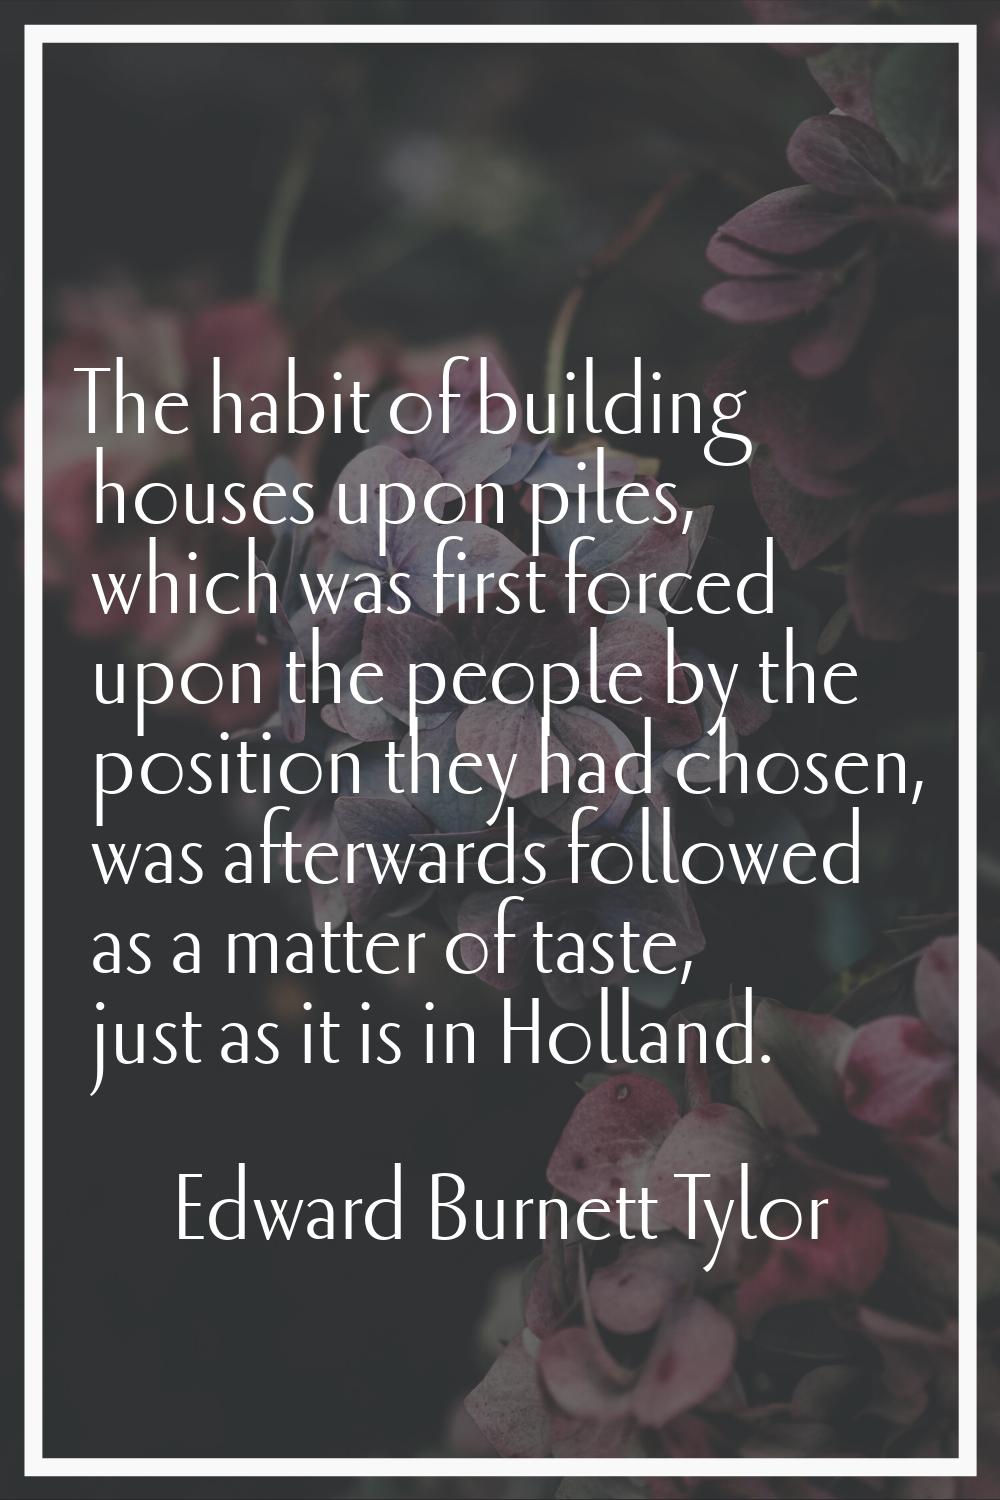 The habit of building houses upon piles, which was first forced upon the people by the position the